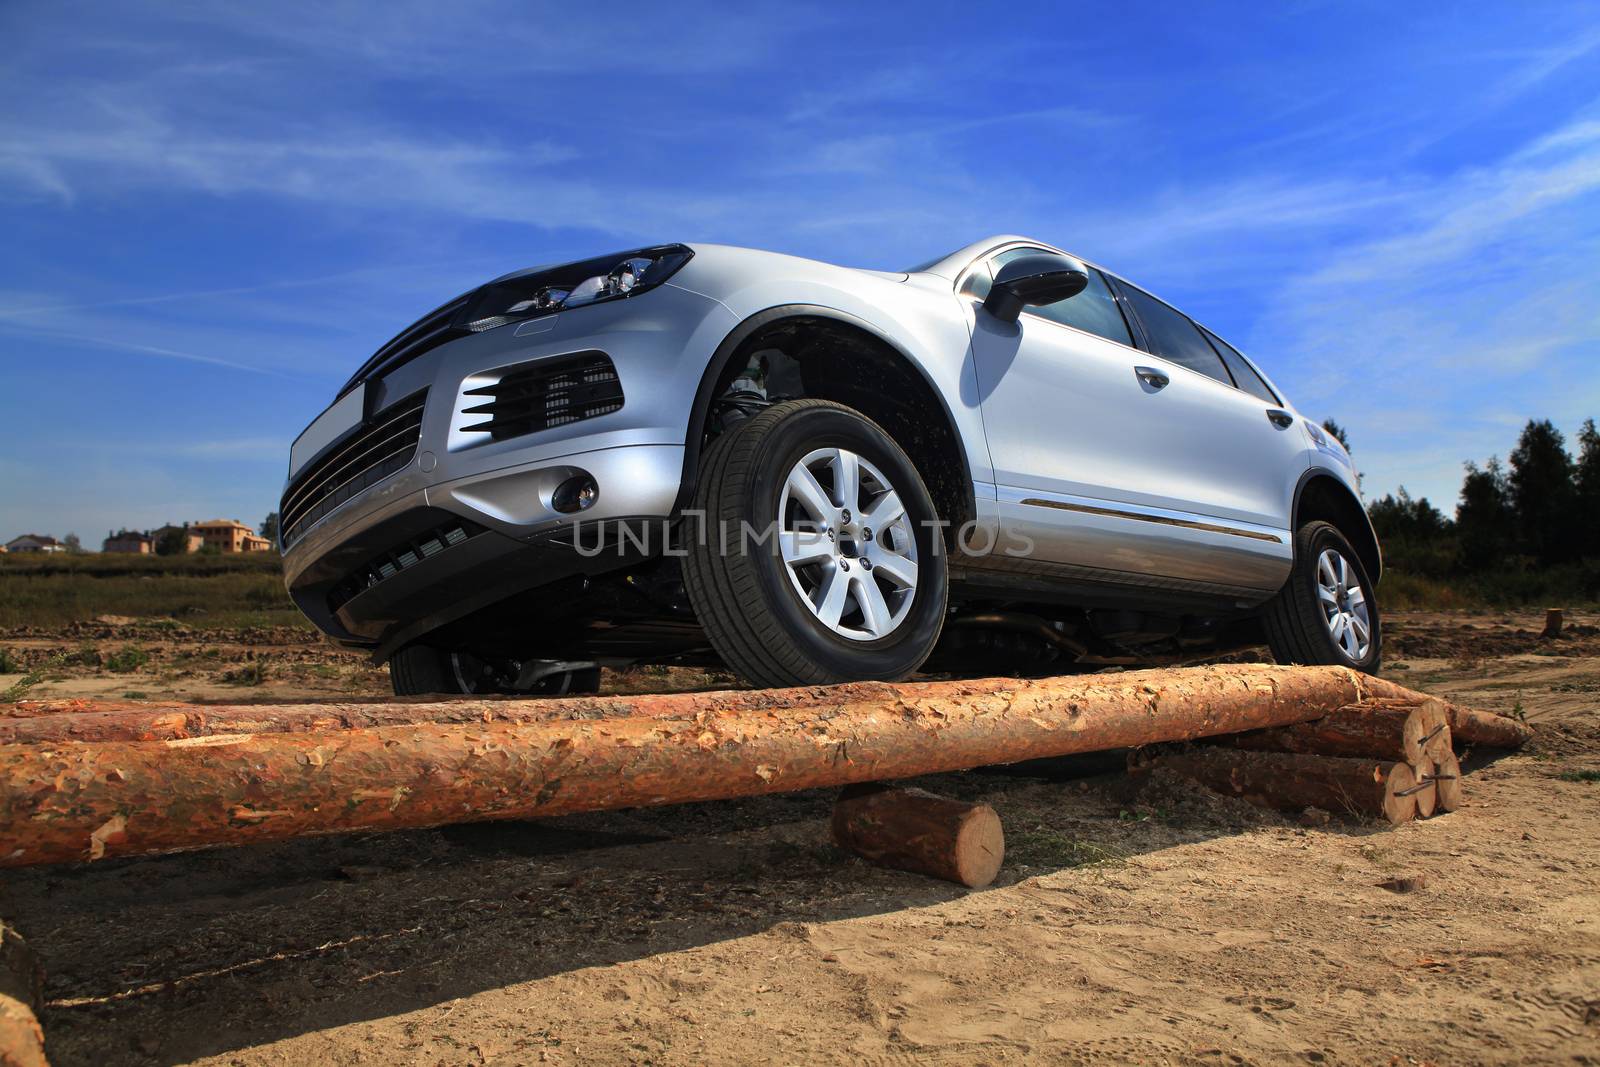 test drive of SUV car by ssuaphoto